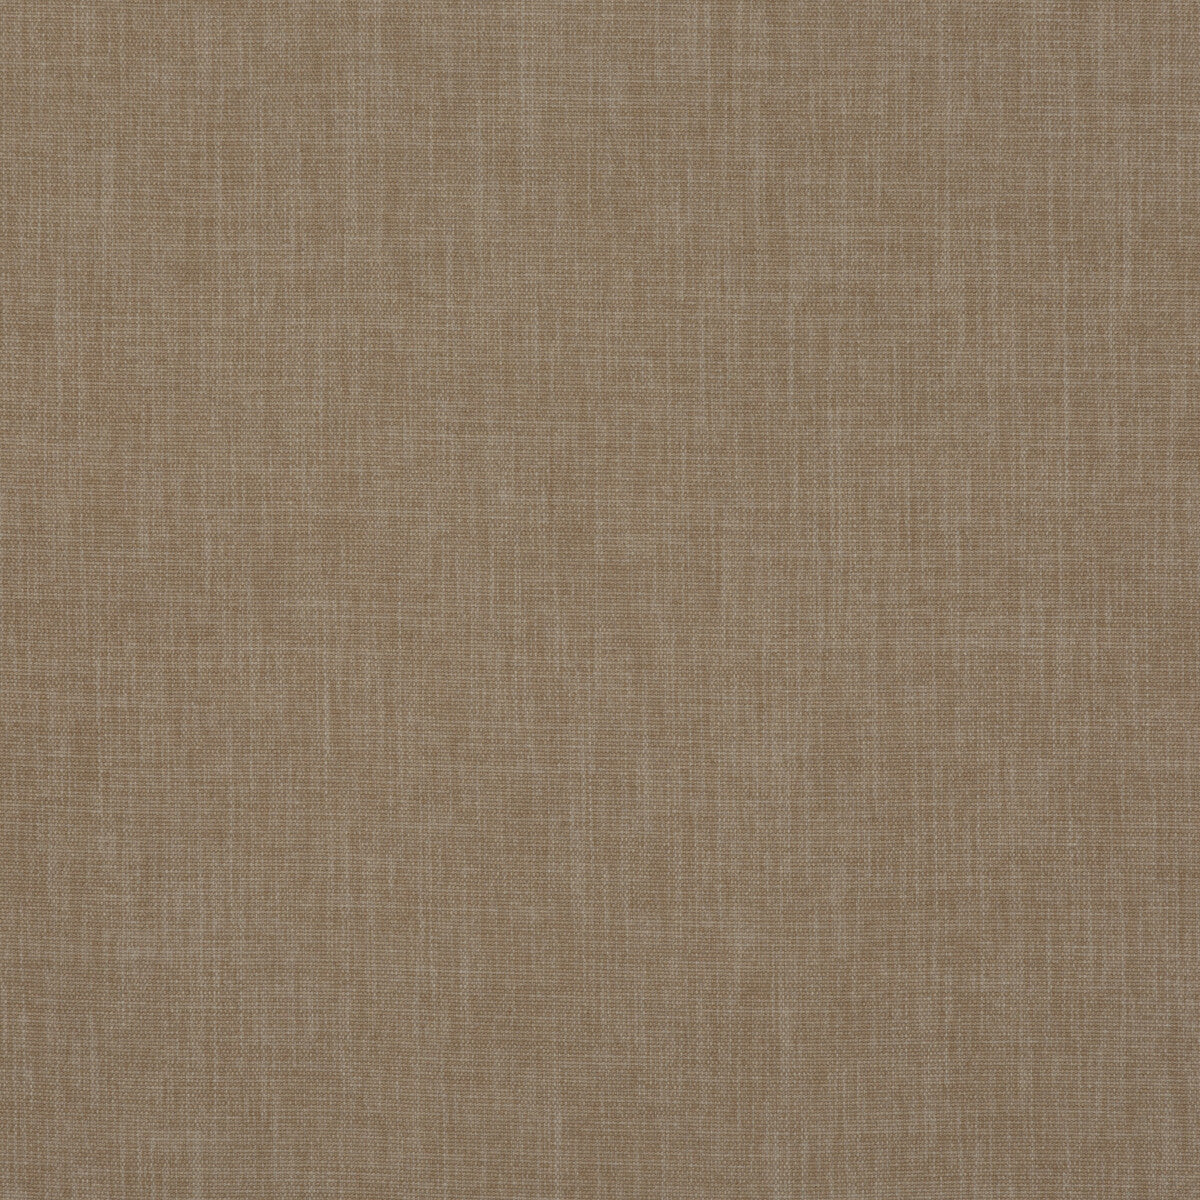 Fernshaw fabric in sand color - pattern PF50410.130.0 - by Baker Lifestyle in the Notebooks collection